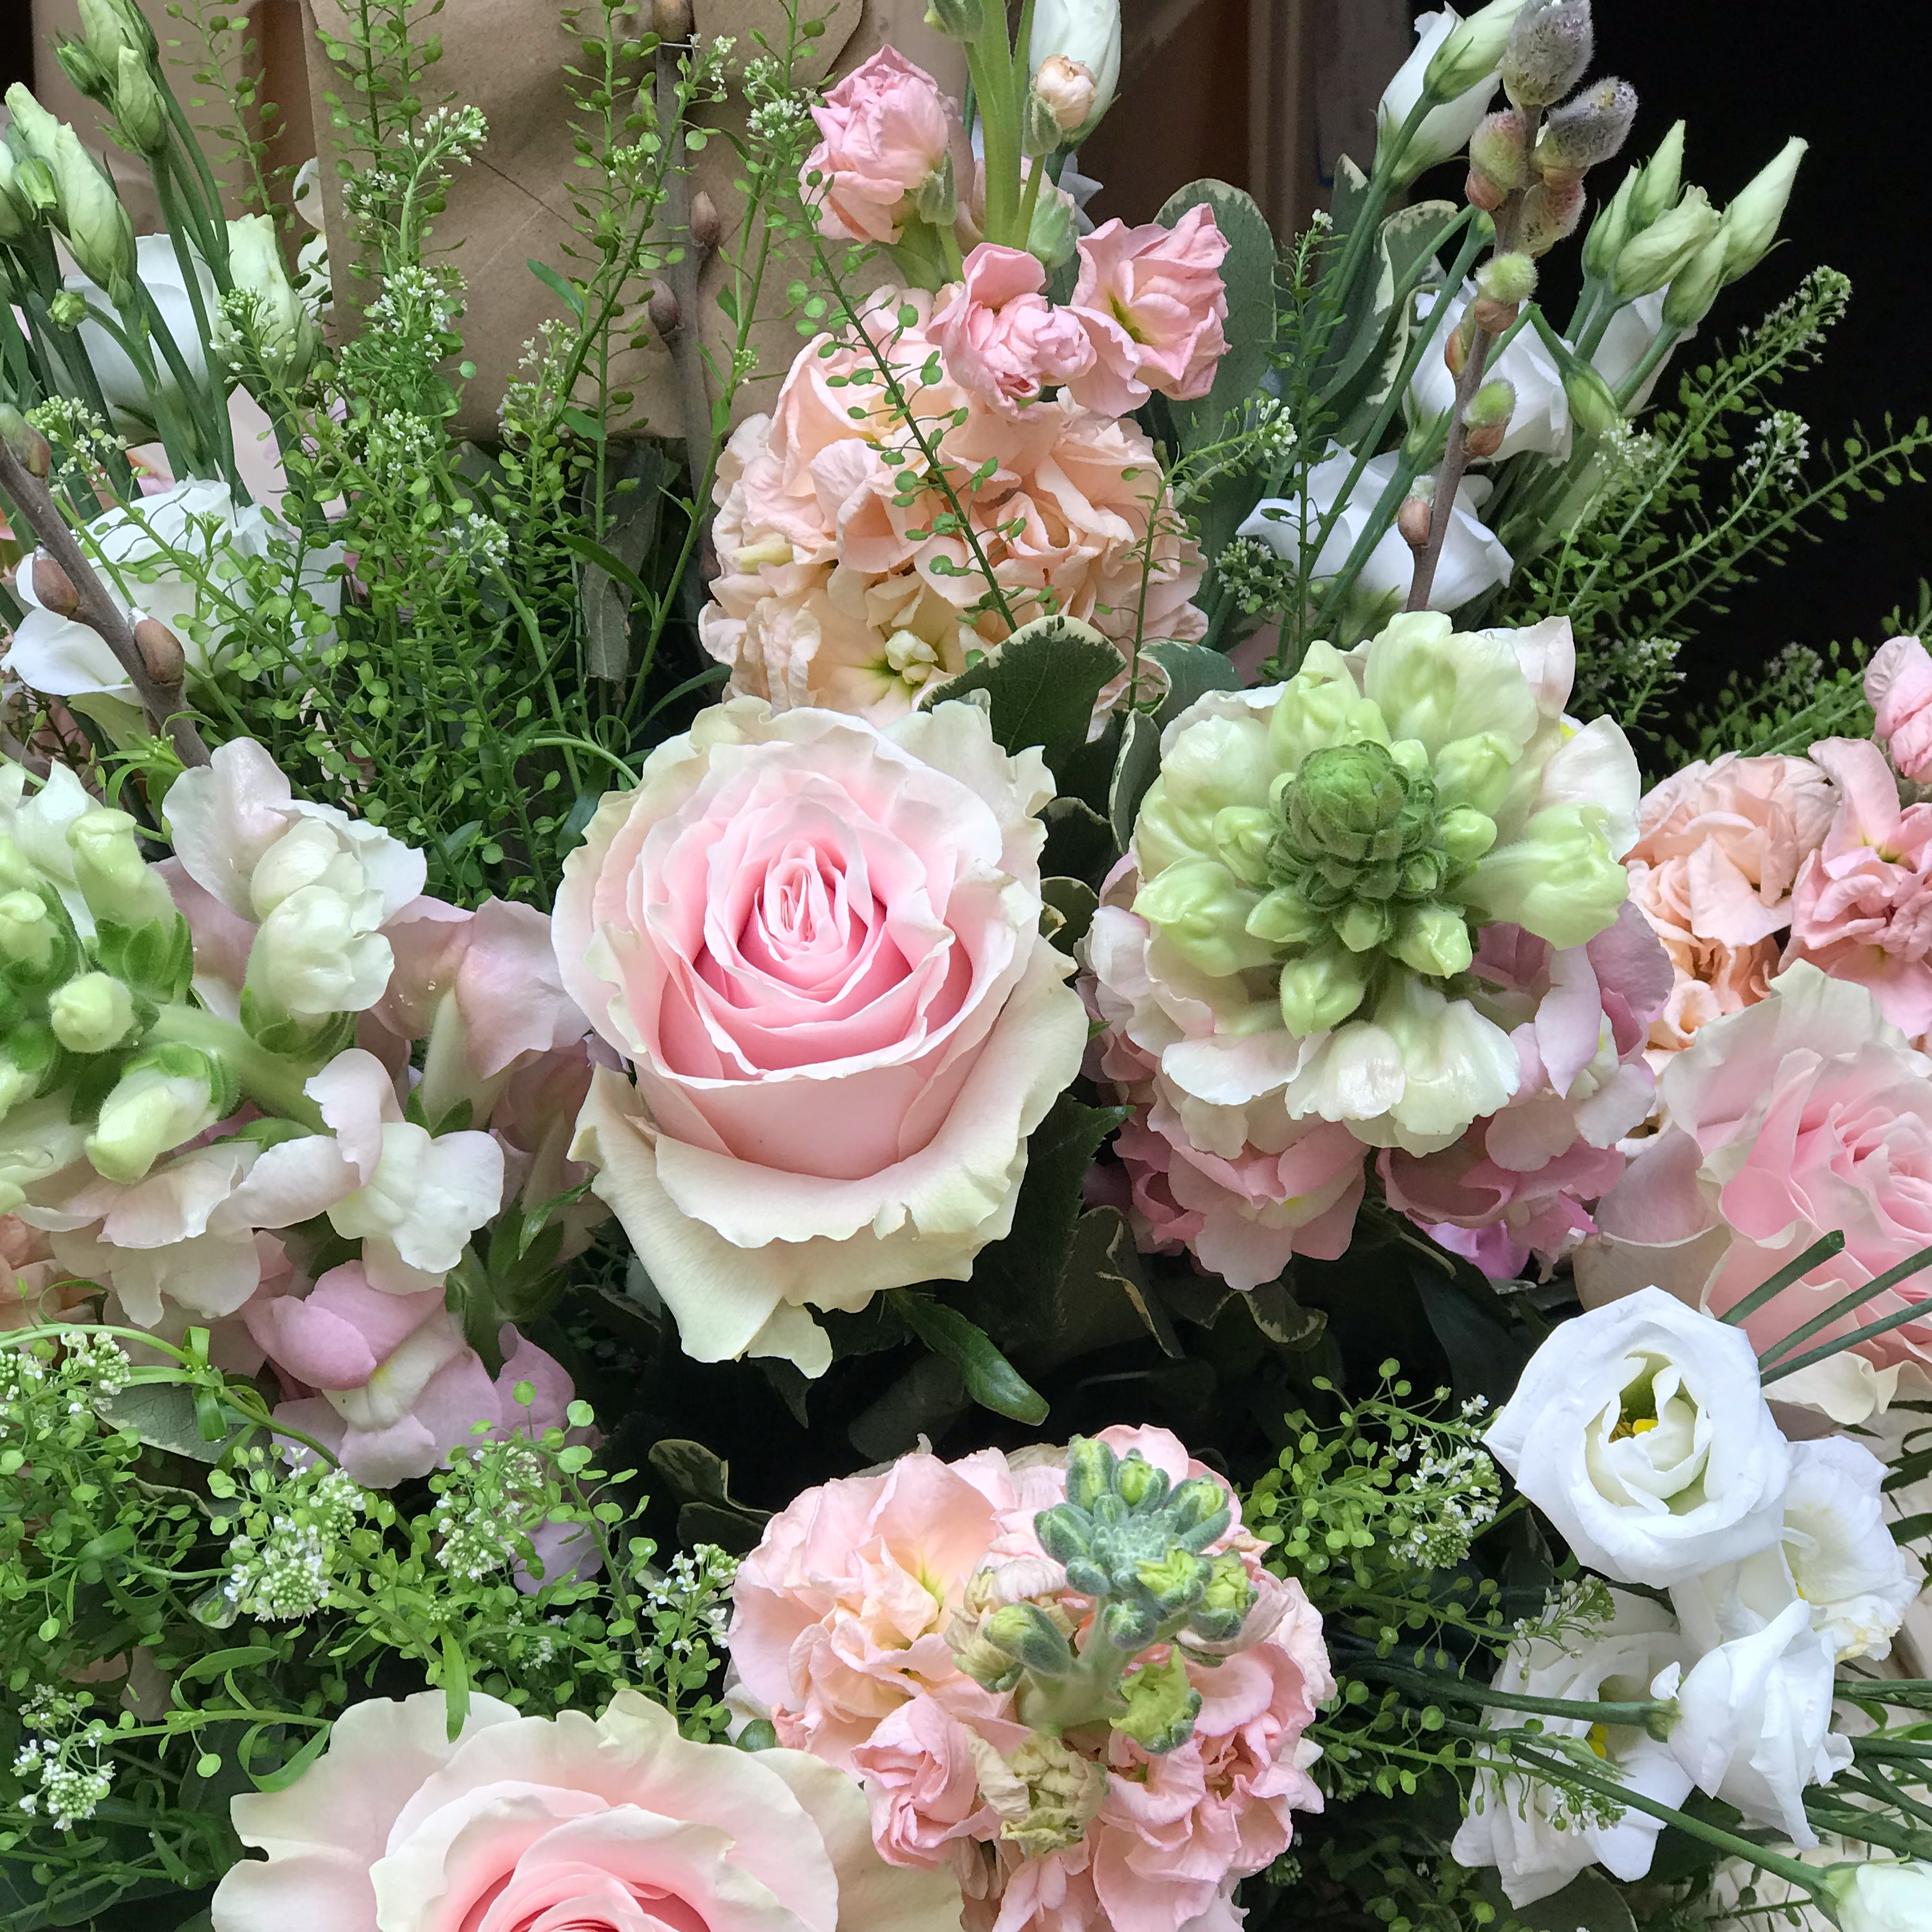 A bouquet of pink and white flowers